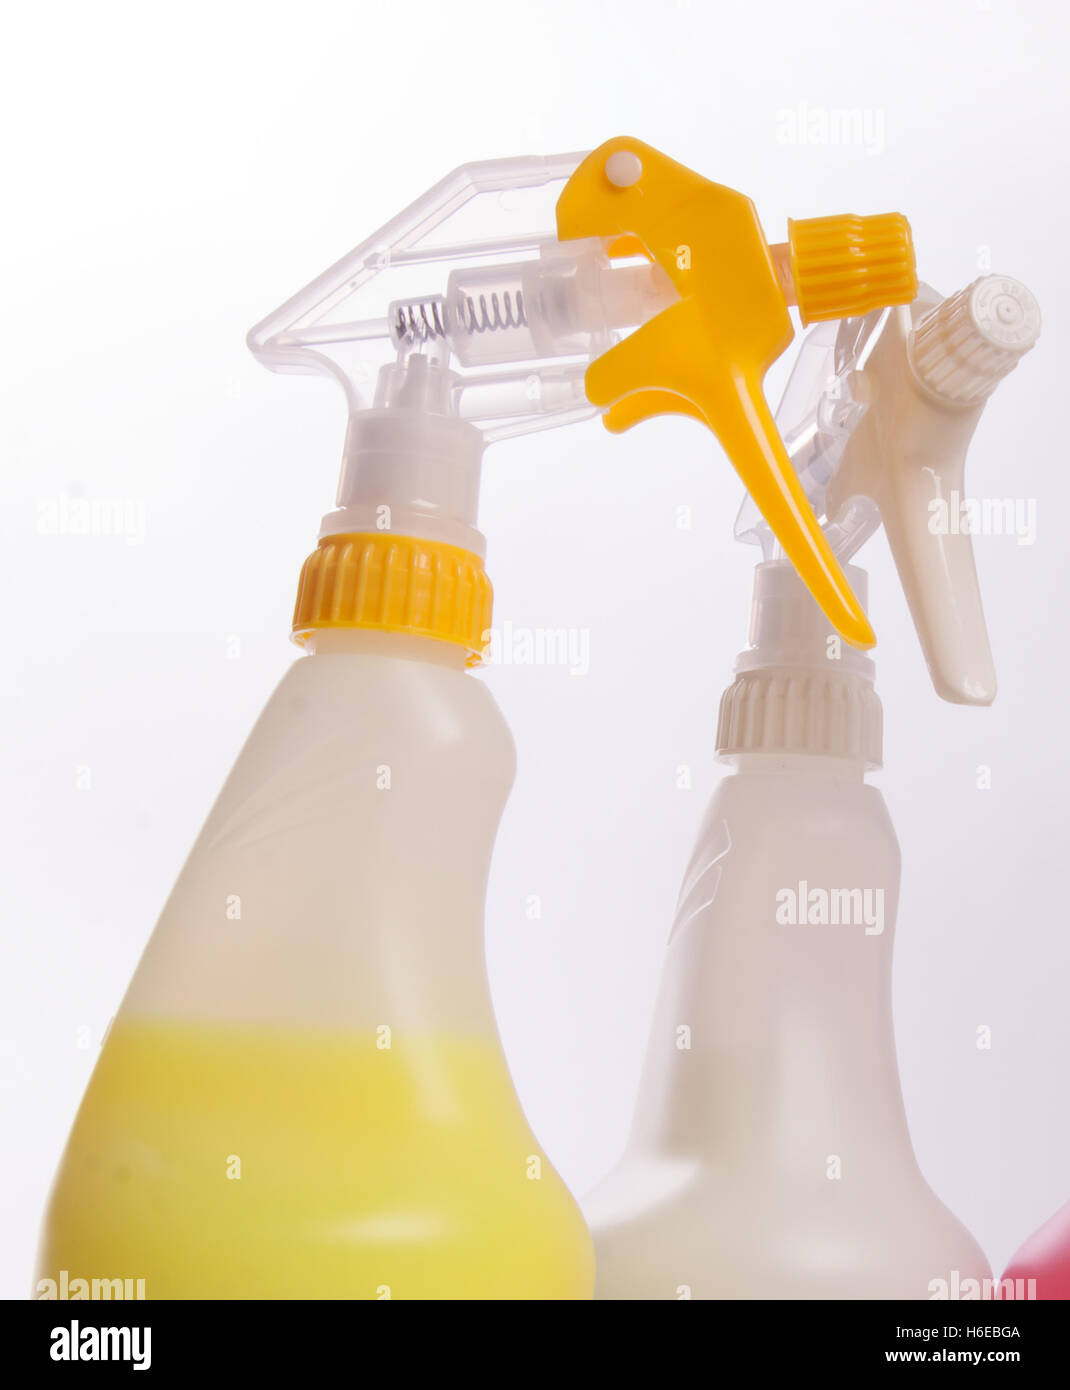 Download Trigger Spray Bottles Hand Held Sprayers In Yellow And White Stock Photo Alamy Yellowimages Mockups